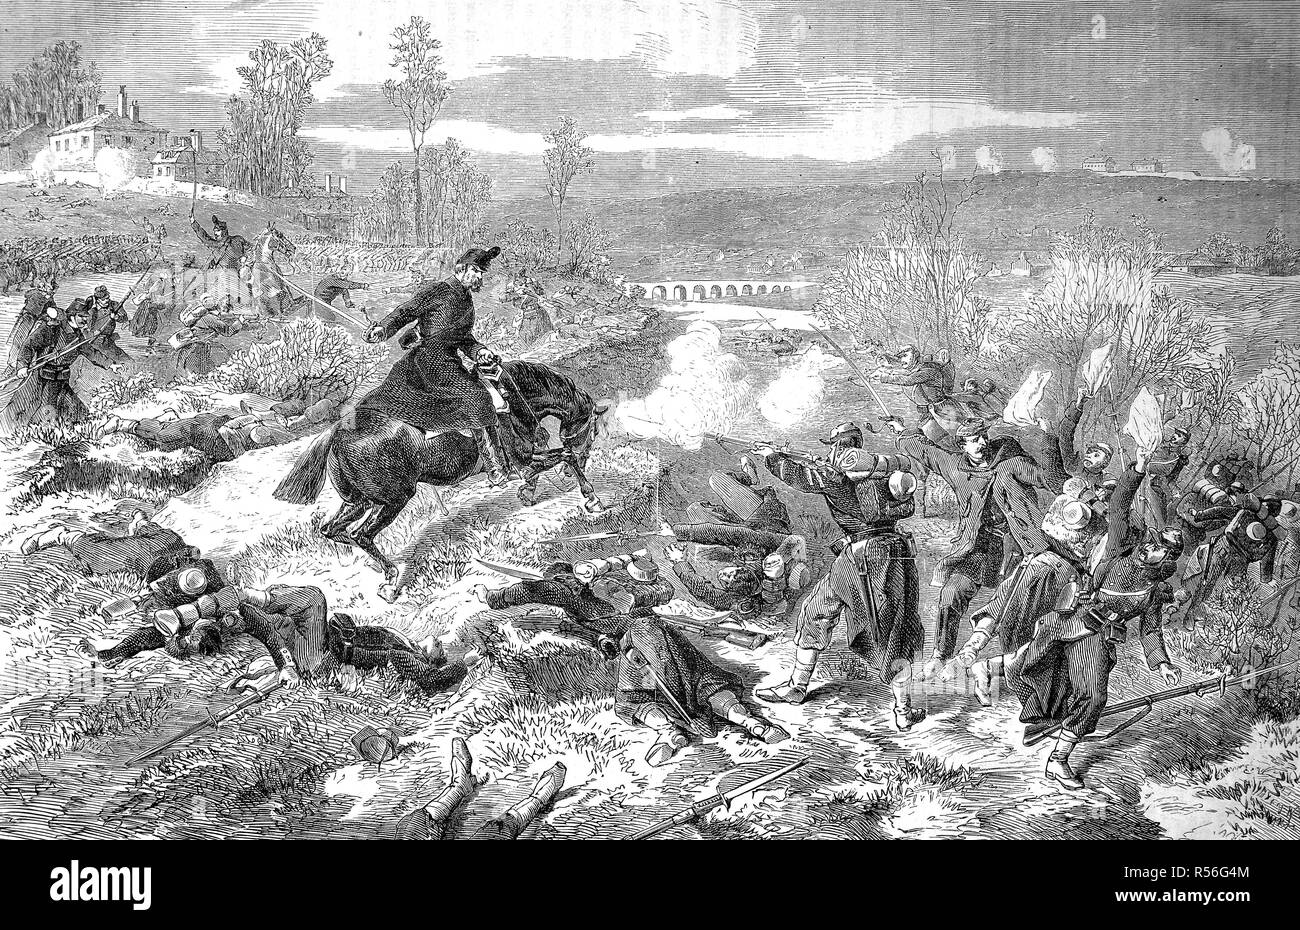 The Royal Saxon Rifle Regiment No.108 in the battle near Villiers on 2 December, Franco-German War 1870/71, woodcut, France Stock Photo